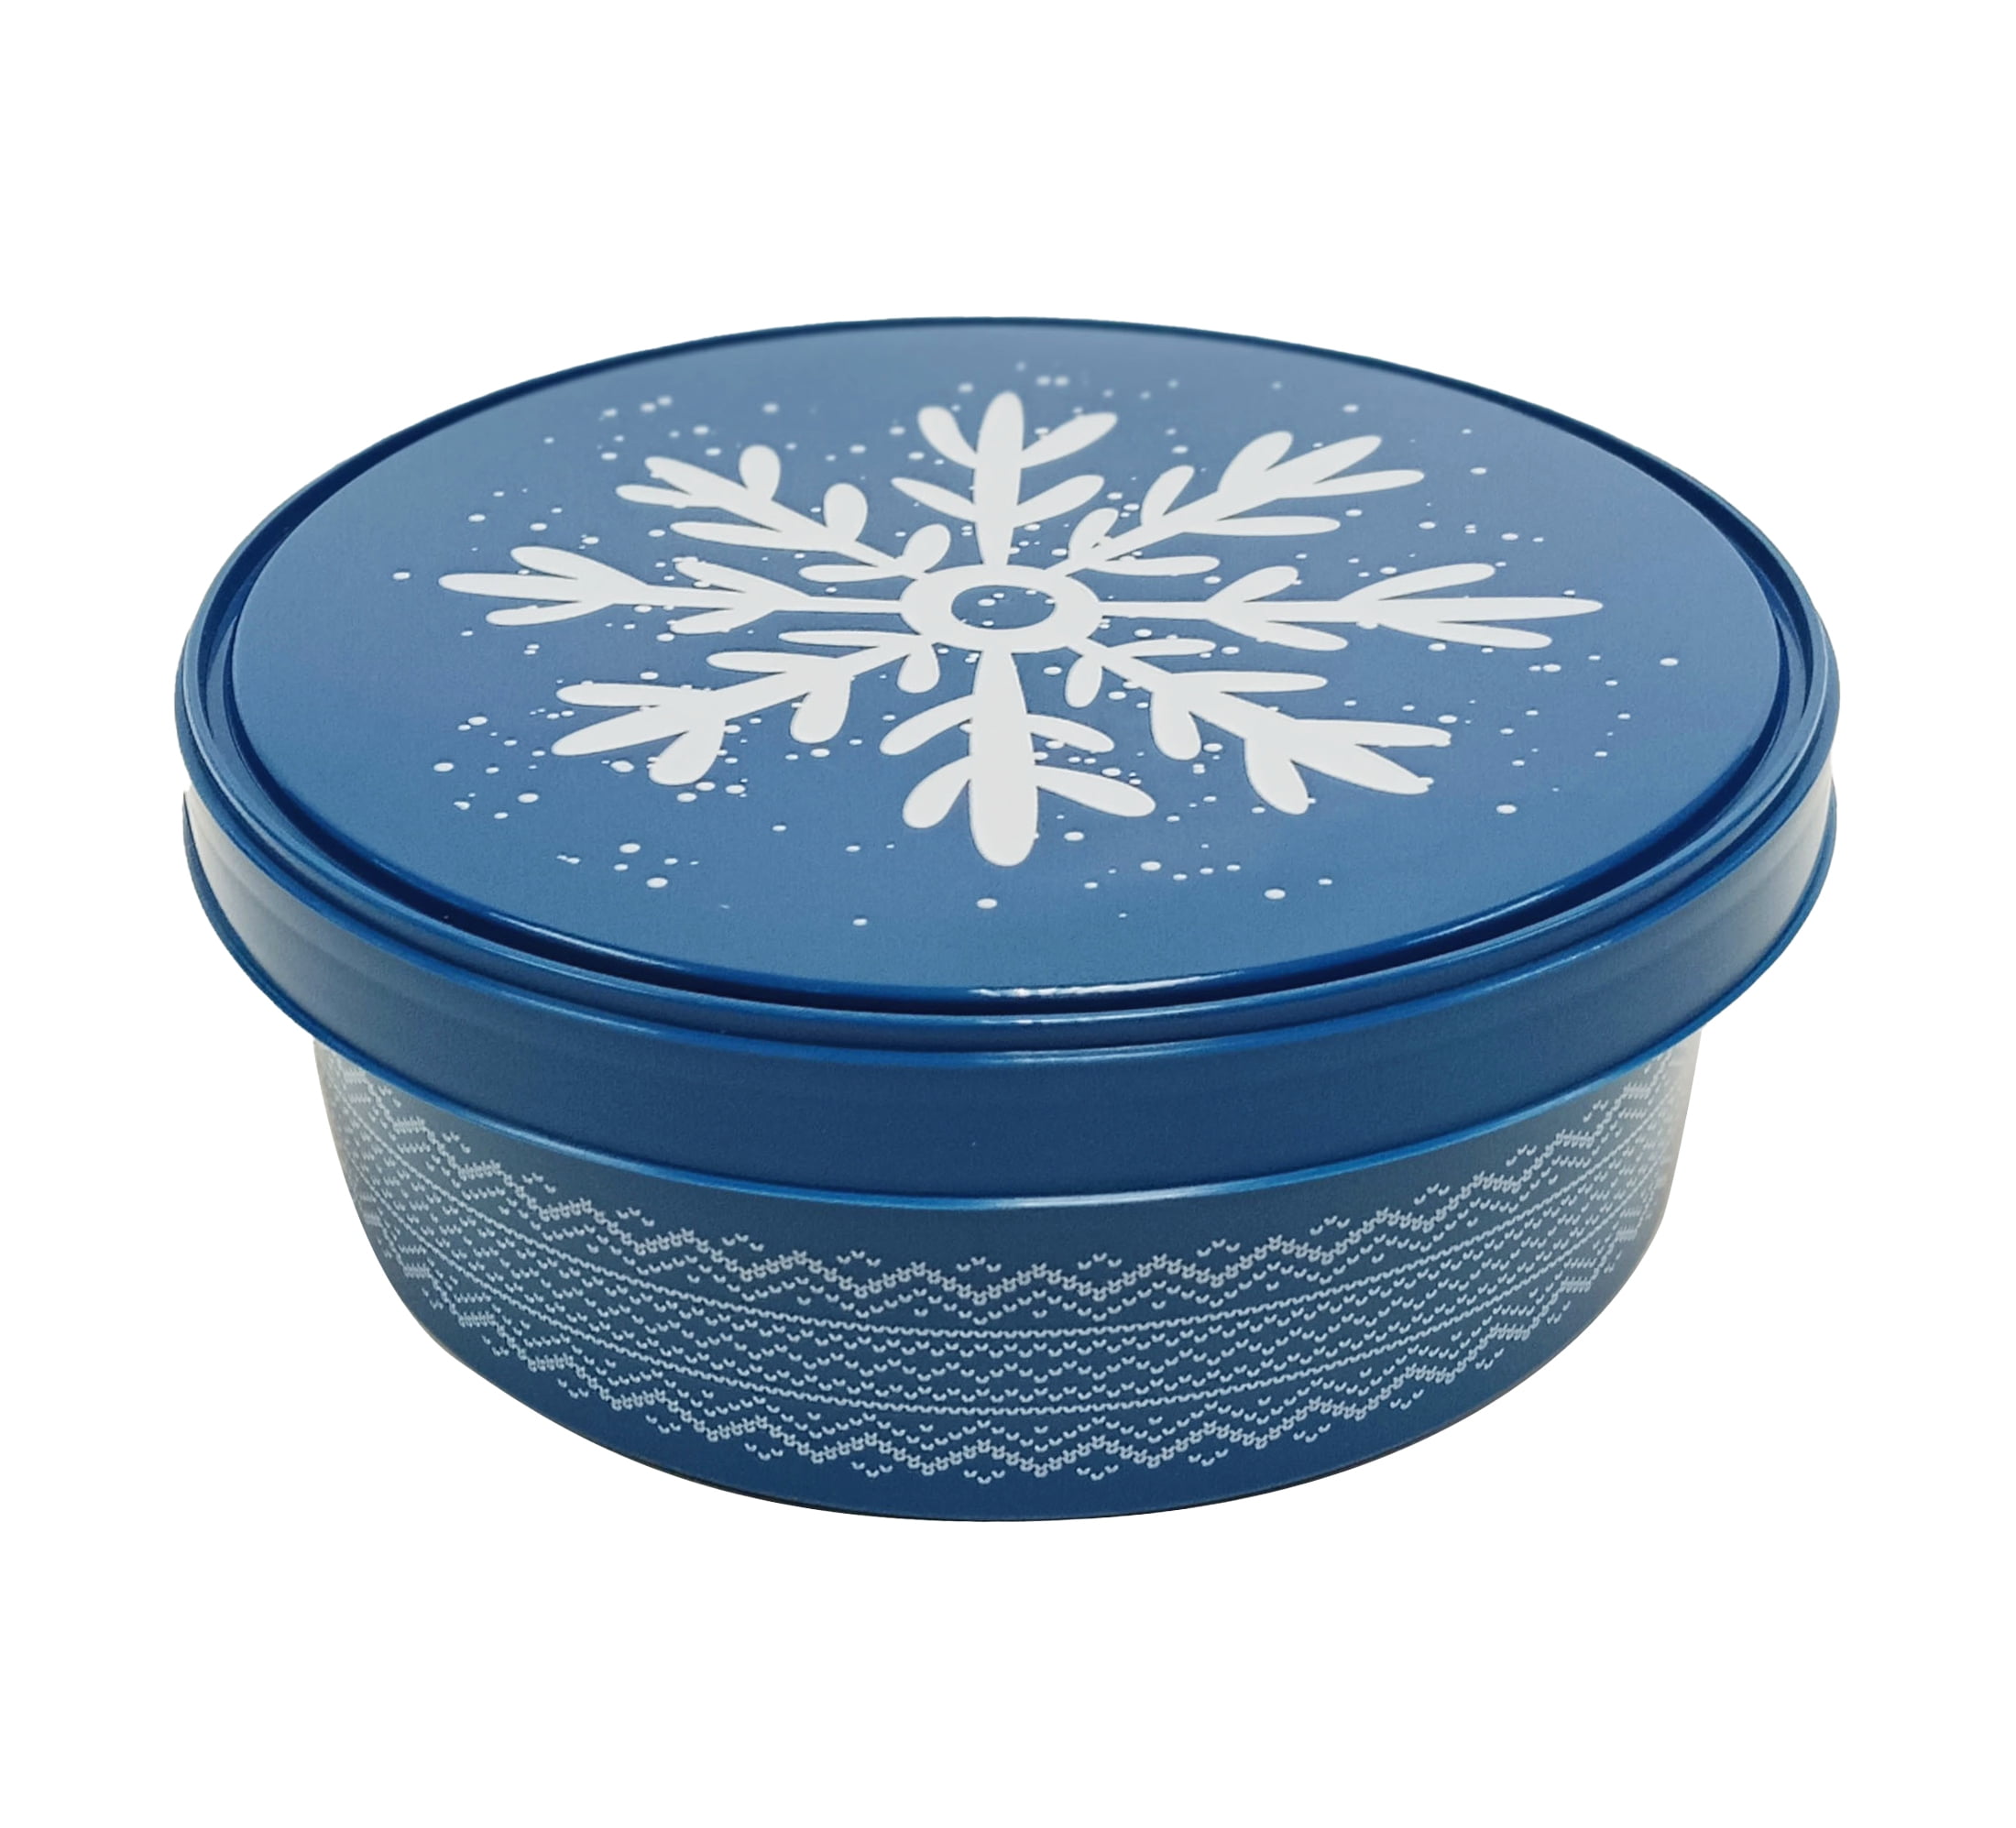 Destination Holiday Checkered Round Food Storage Set with Lids - Blue -  Shop Food Storage at H-E-B